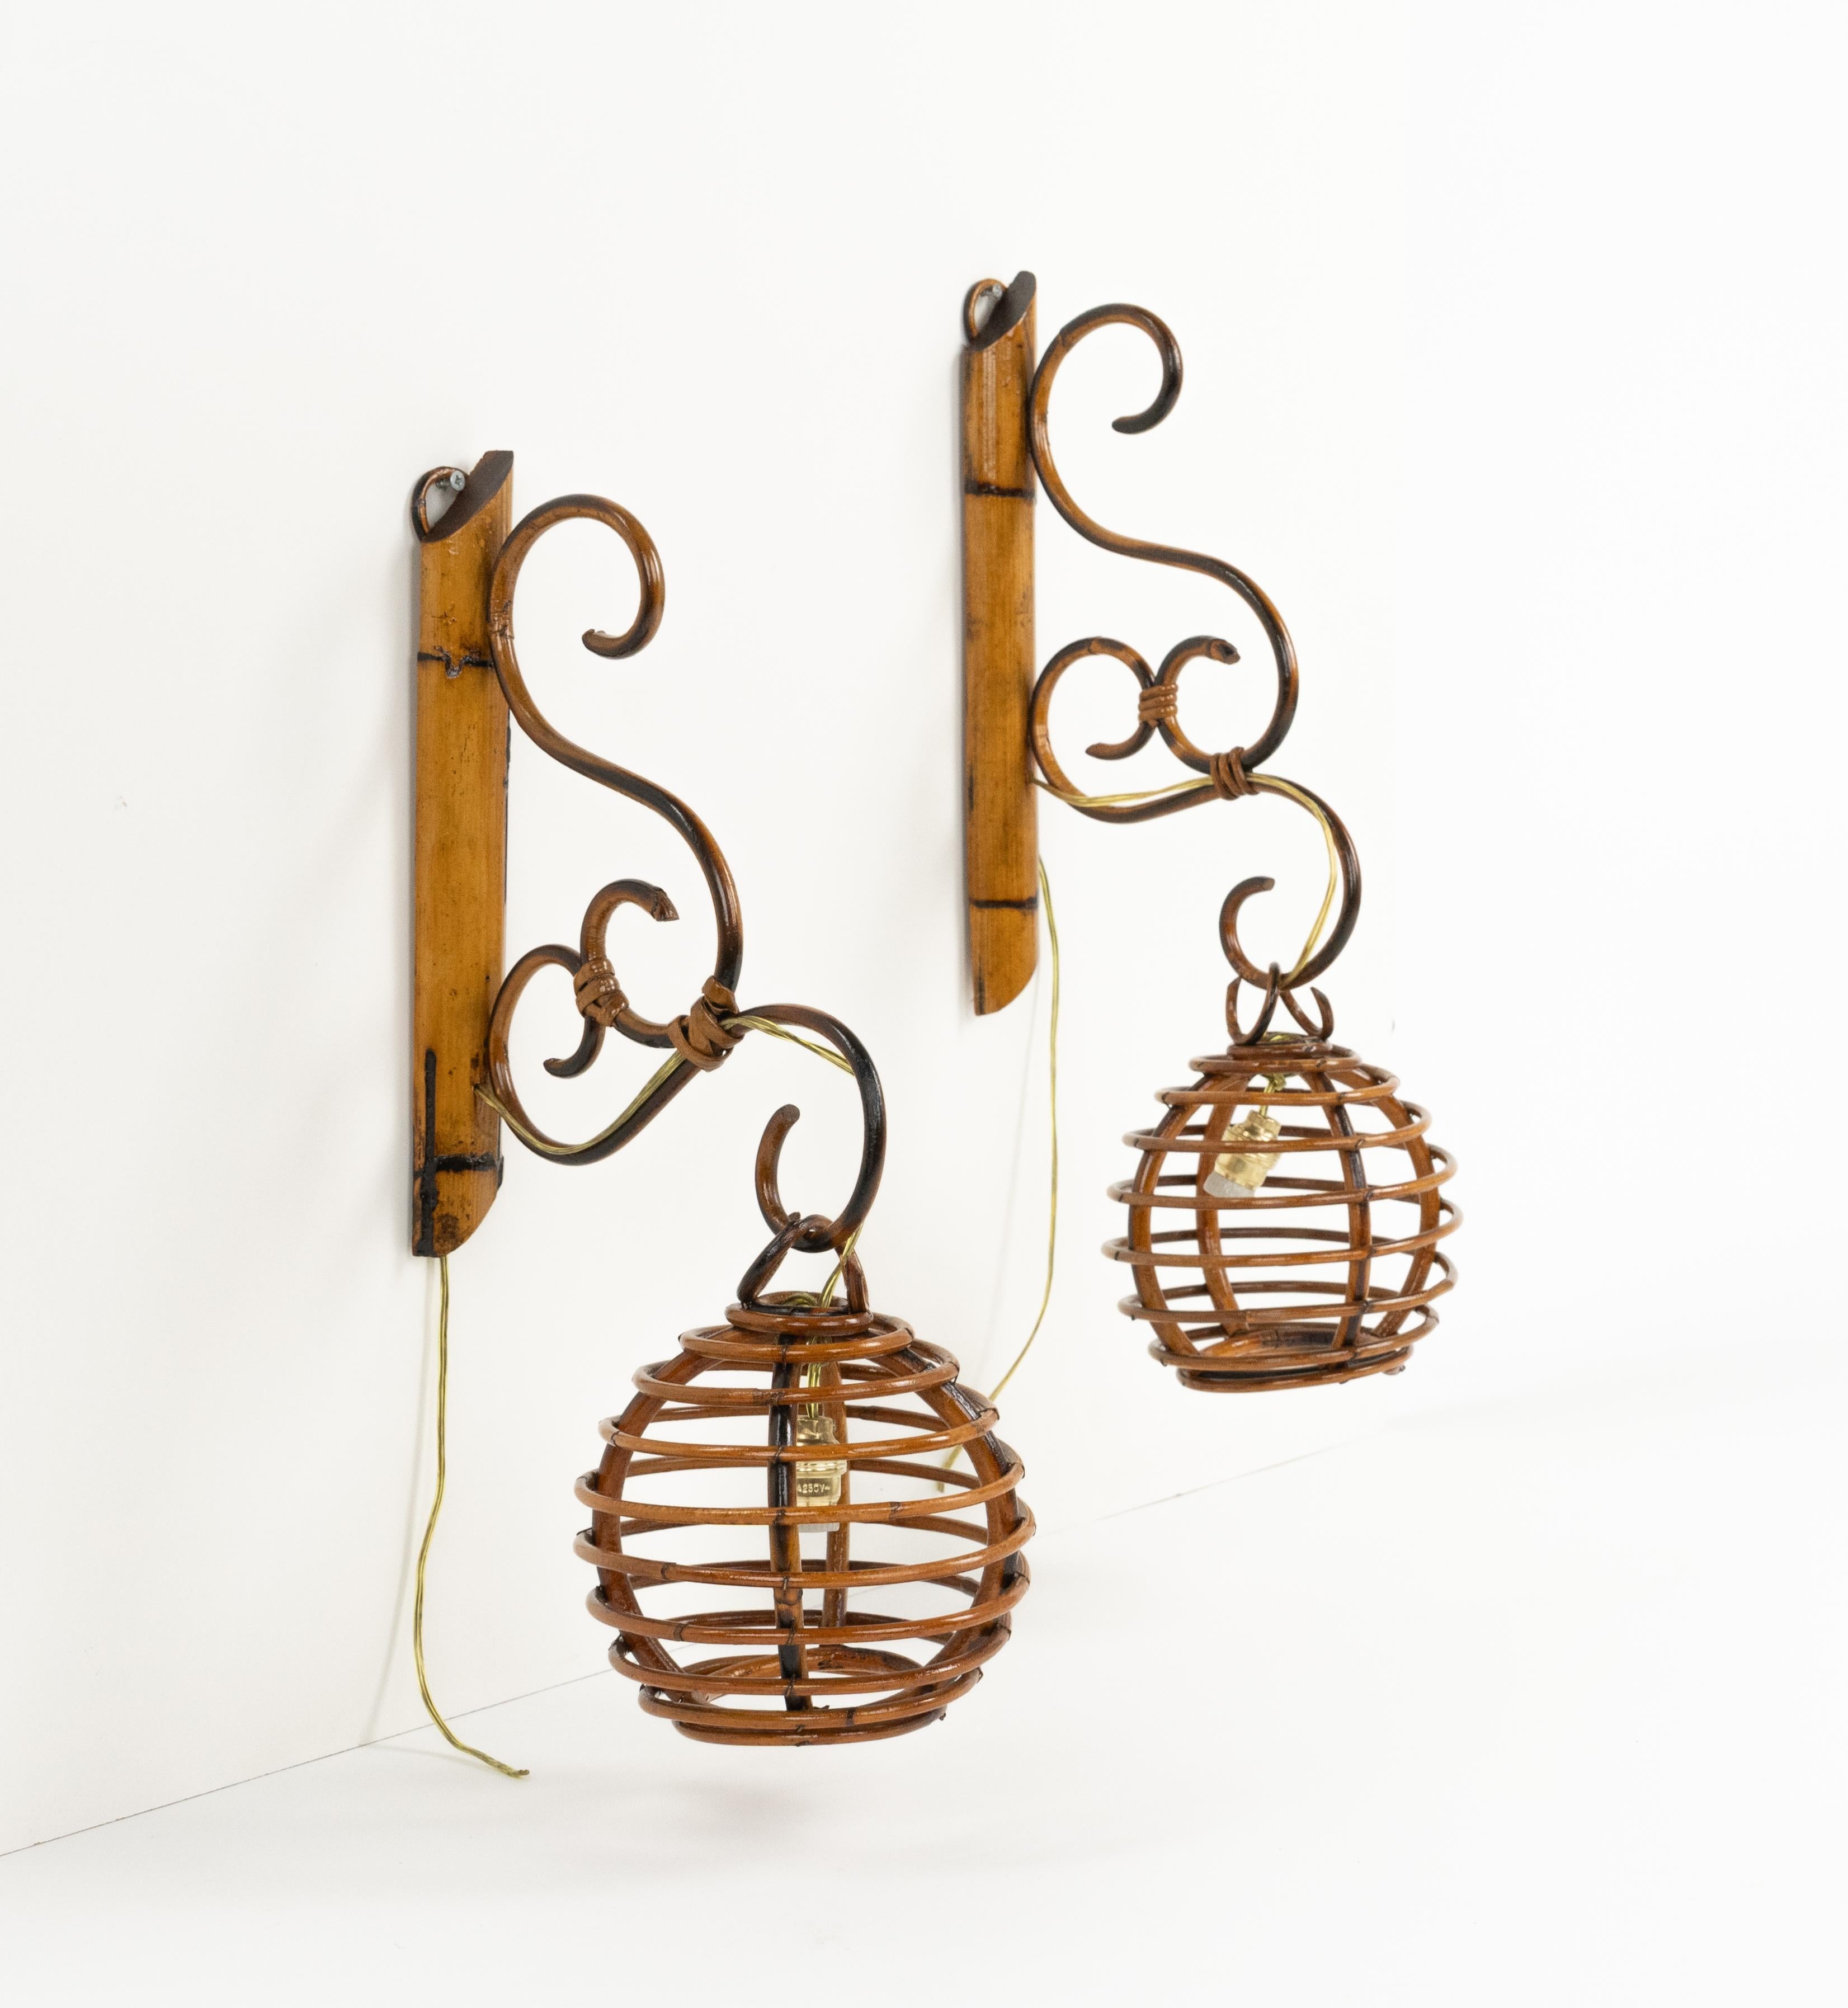 Midcentury Pair of Sconces in Bamboo and Rattan Louis Sognot Style, Italy 1960s For Sale 1